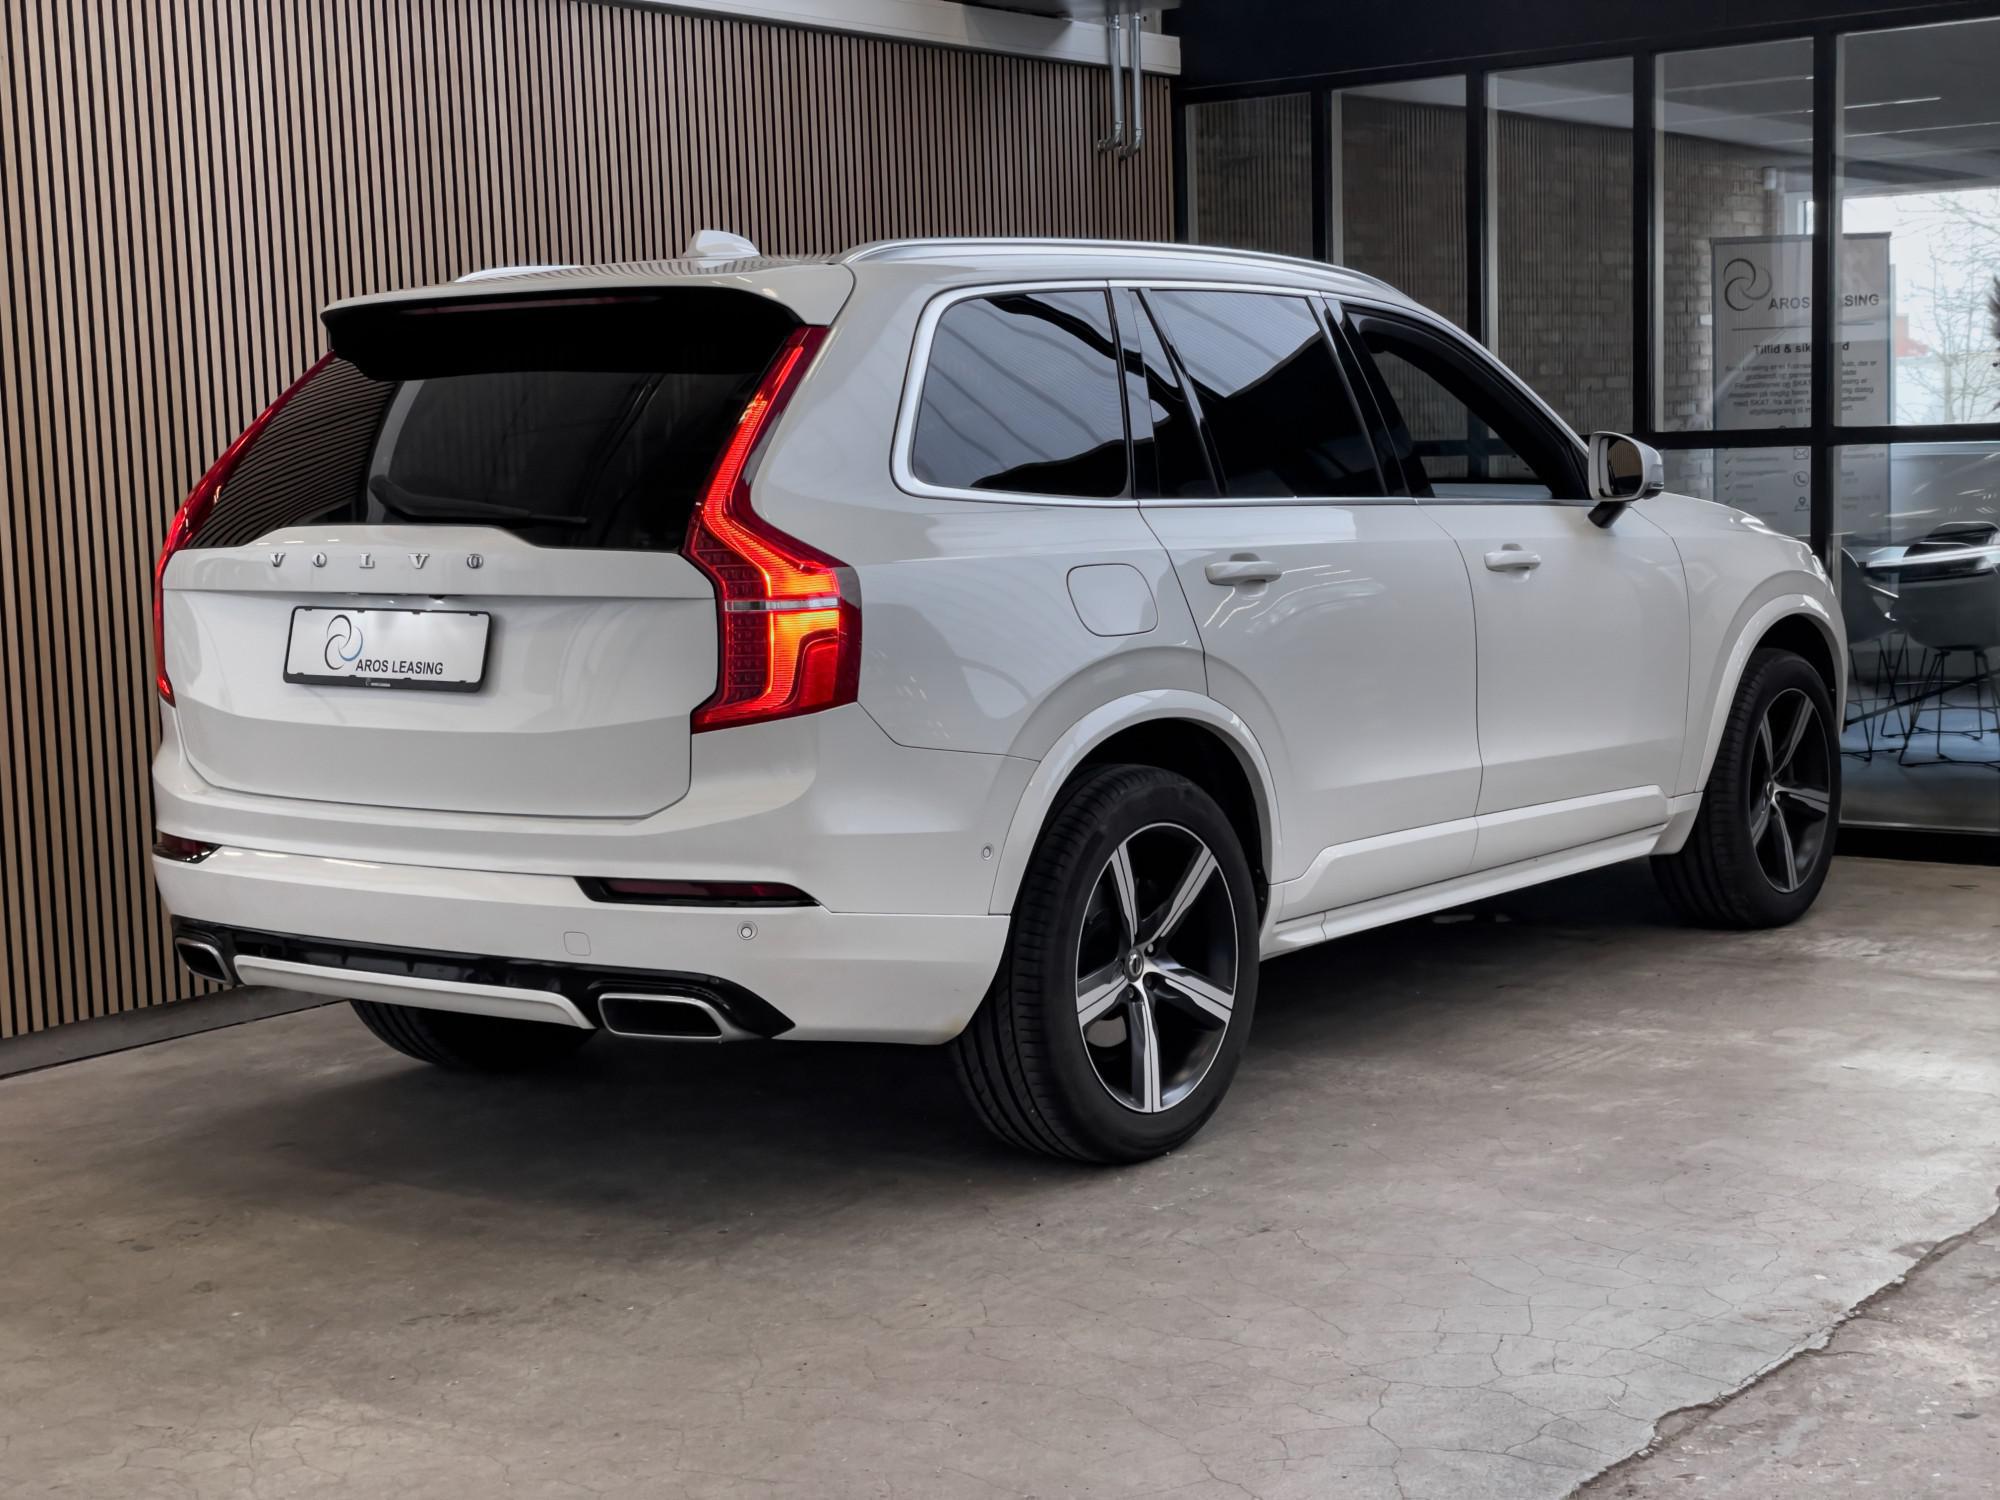 flexleasing-volvo-xc90-20-d5-235-hk-awd-automatic-findleasing